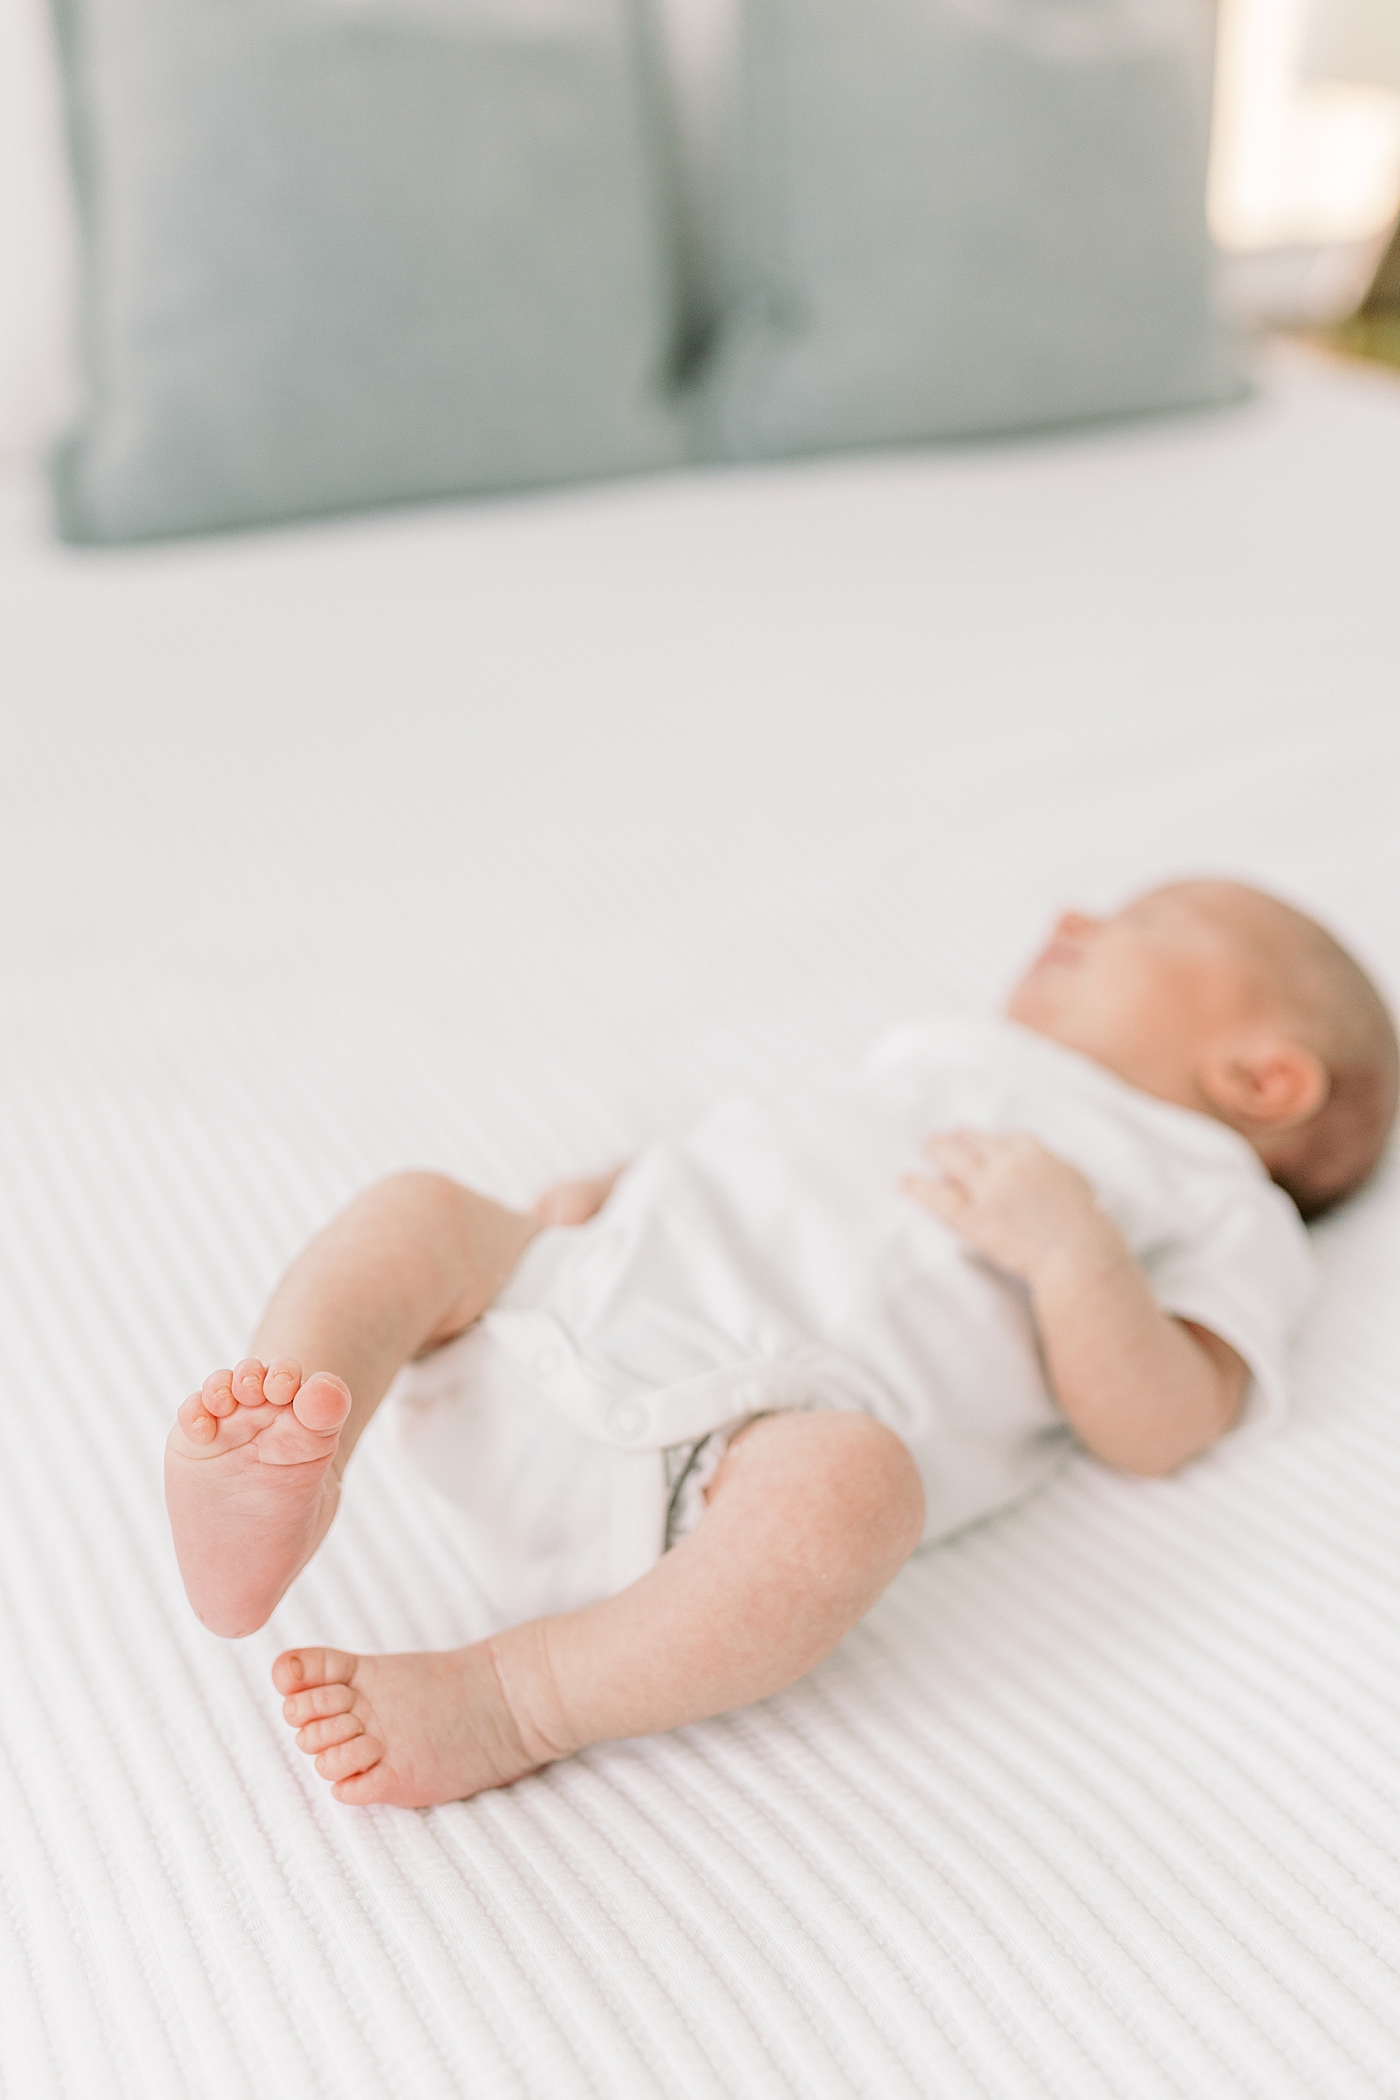 Detail of baby's foot during lifestyle newborn photos | Image by Caitlyn Motycka